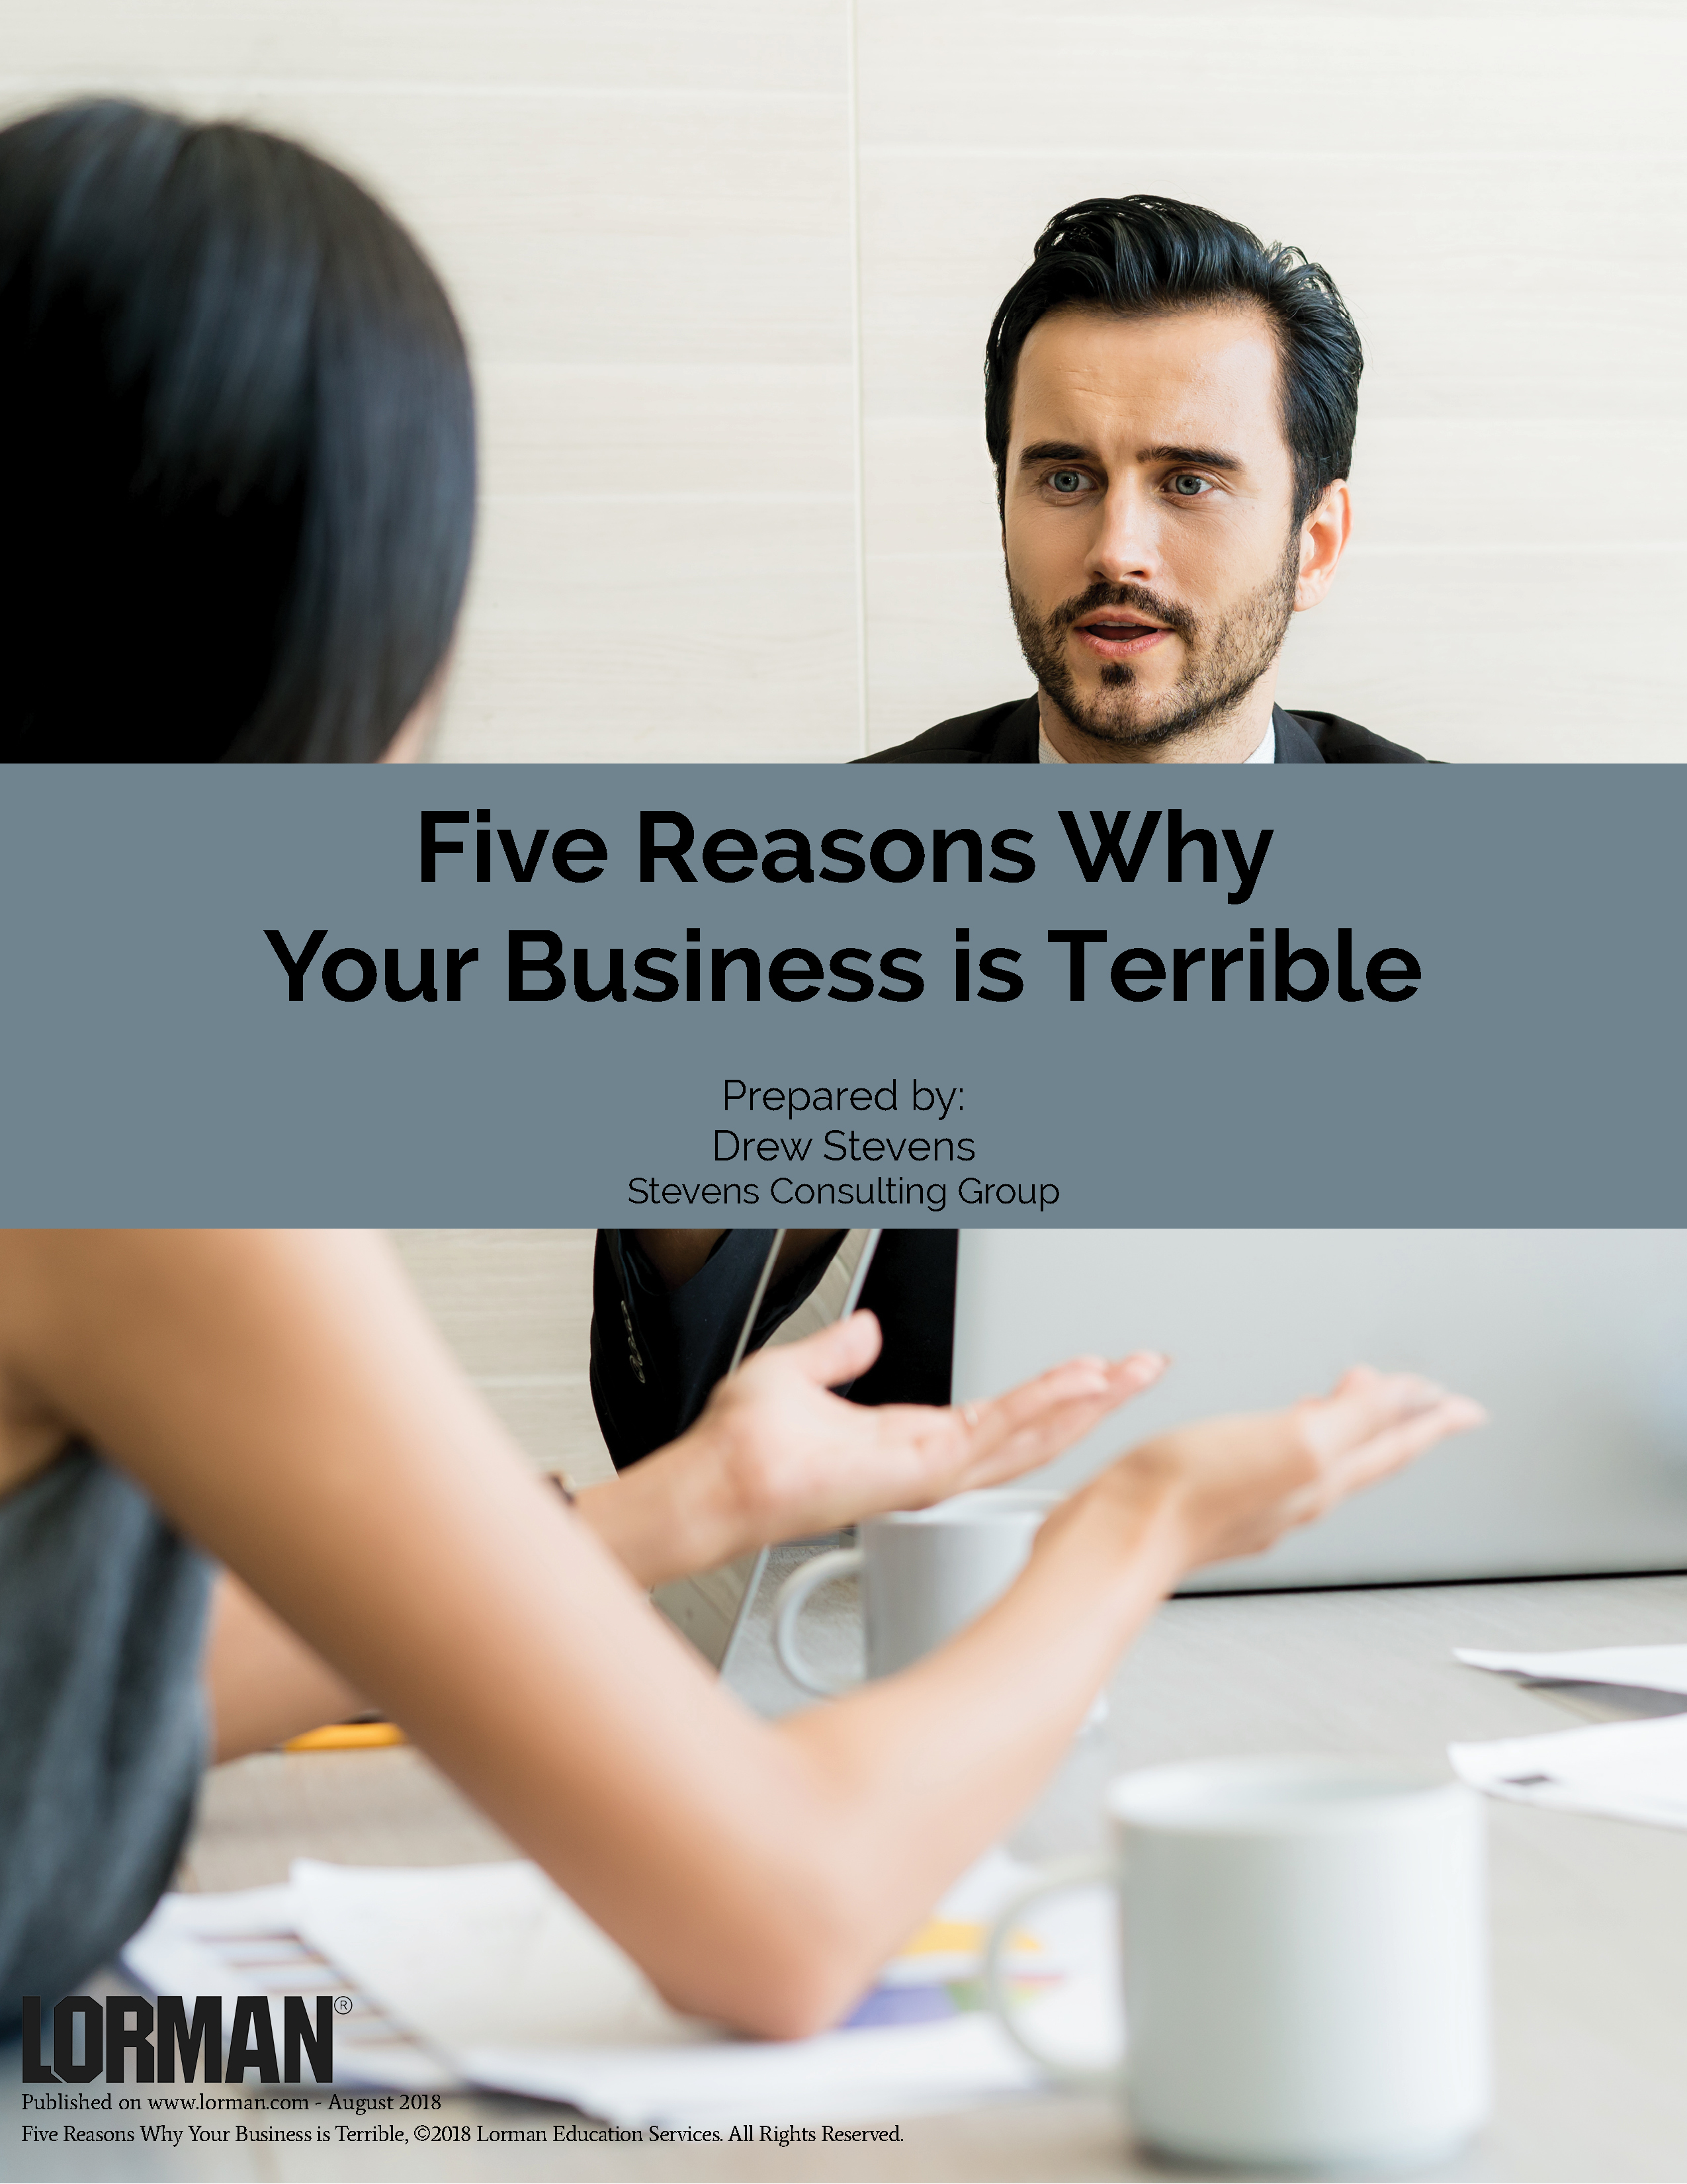 Five Reasons Why Your Business is Terrible